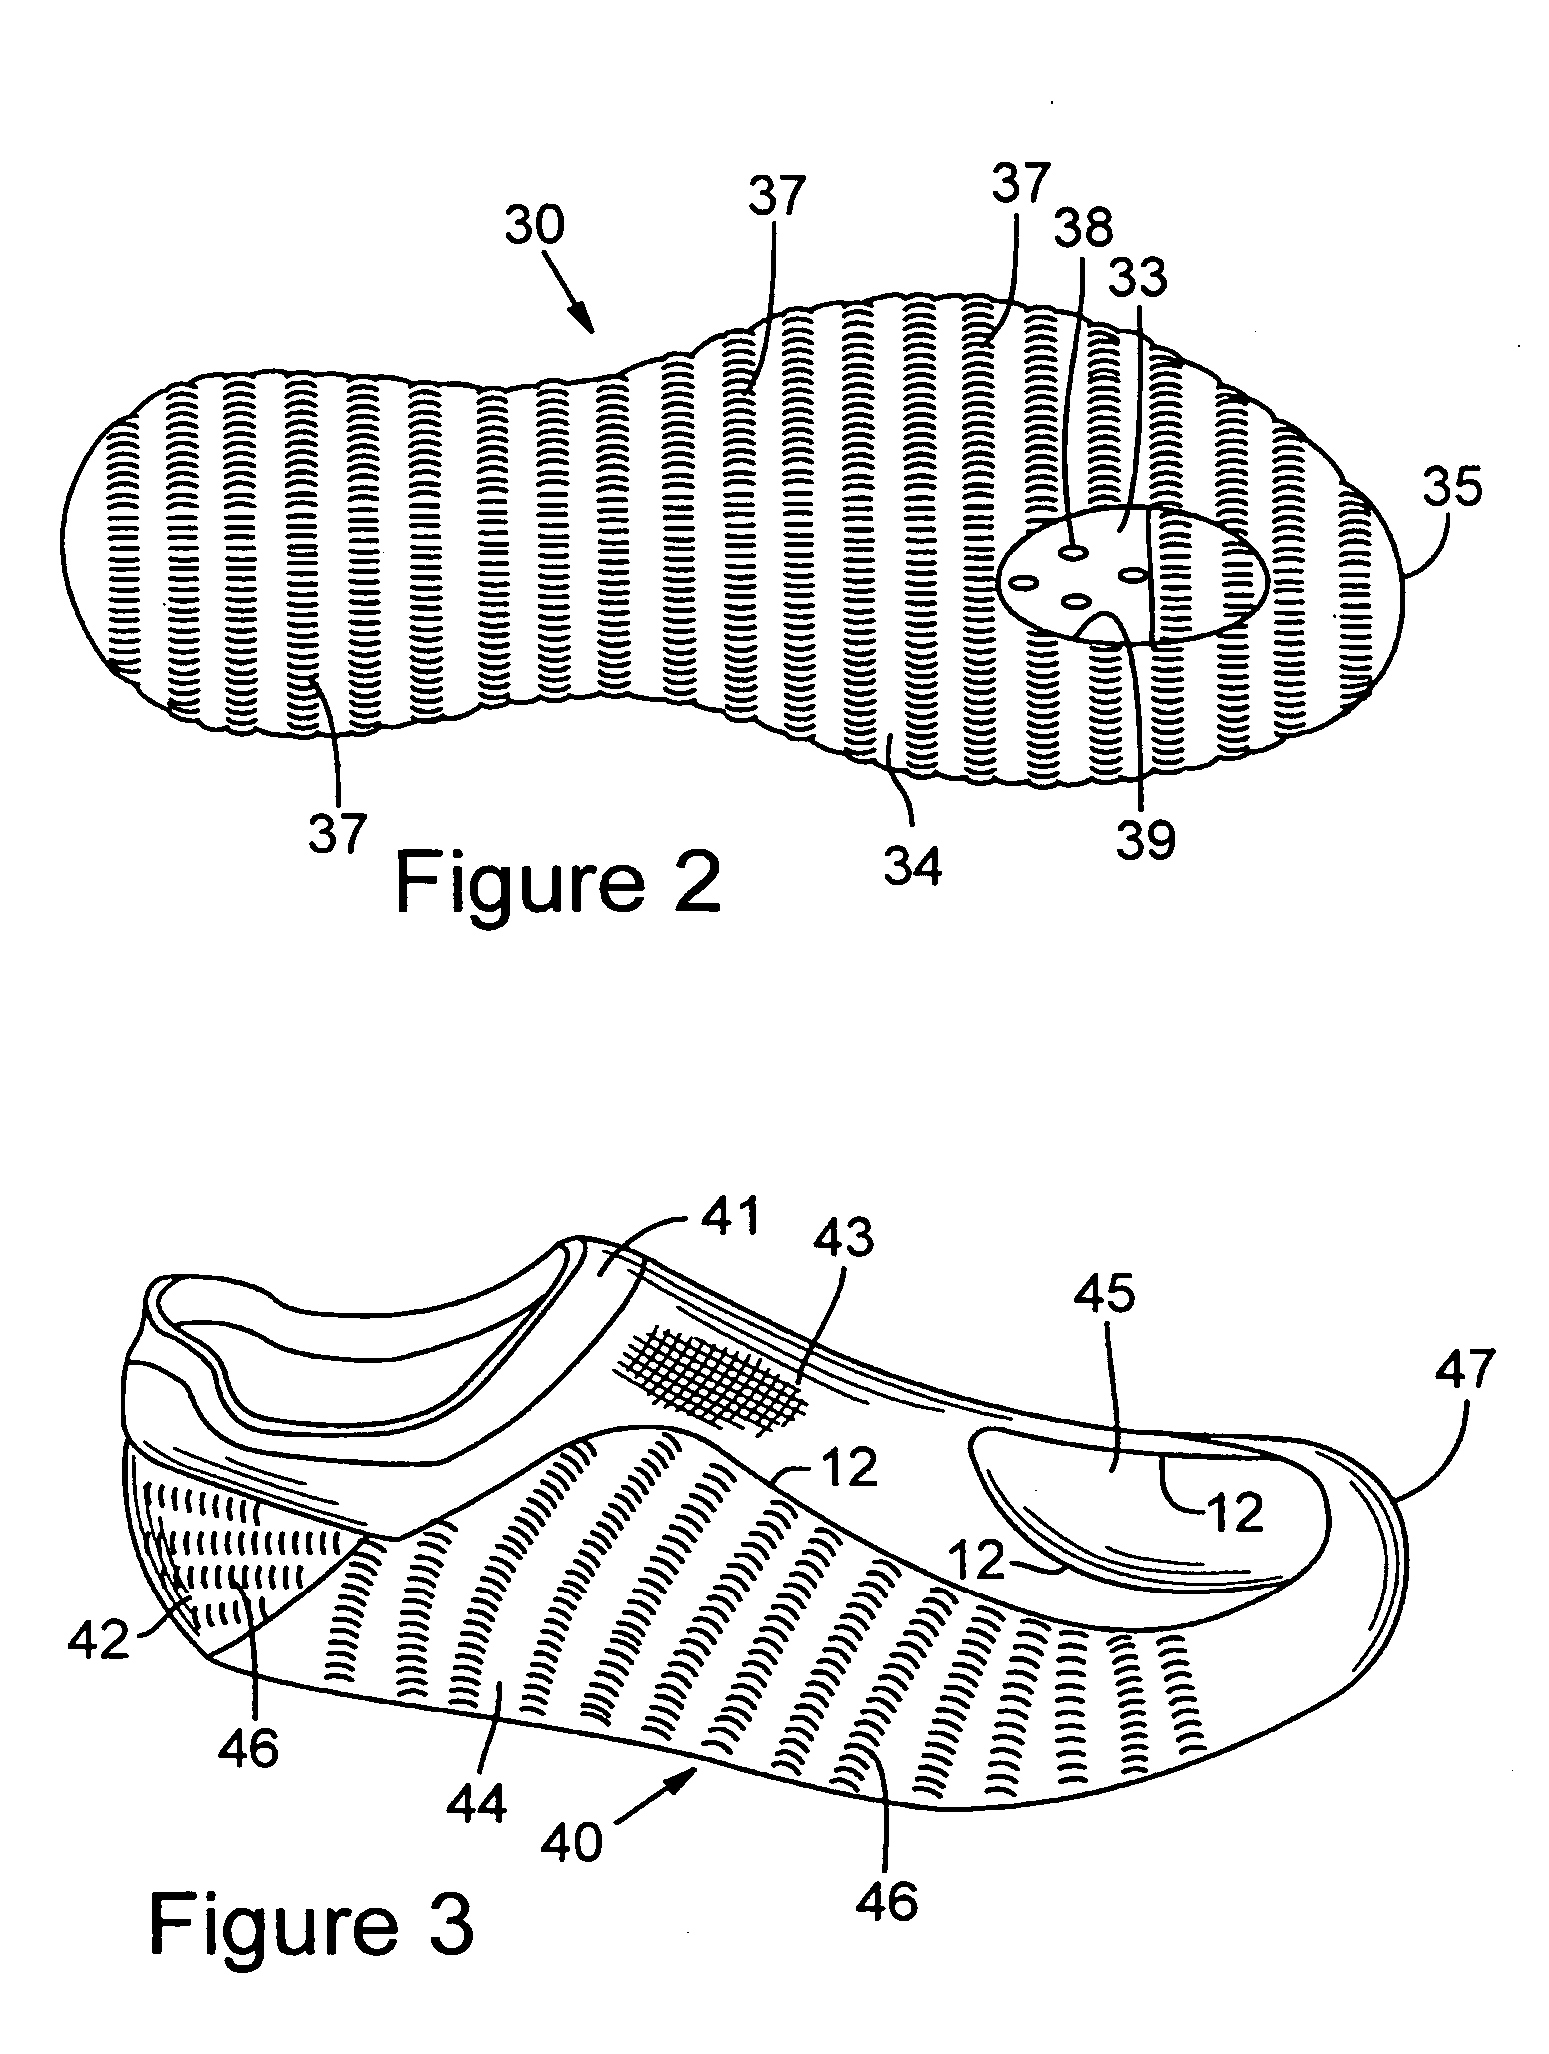 Footwear with knit upper and method of manufacturing the footwear